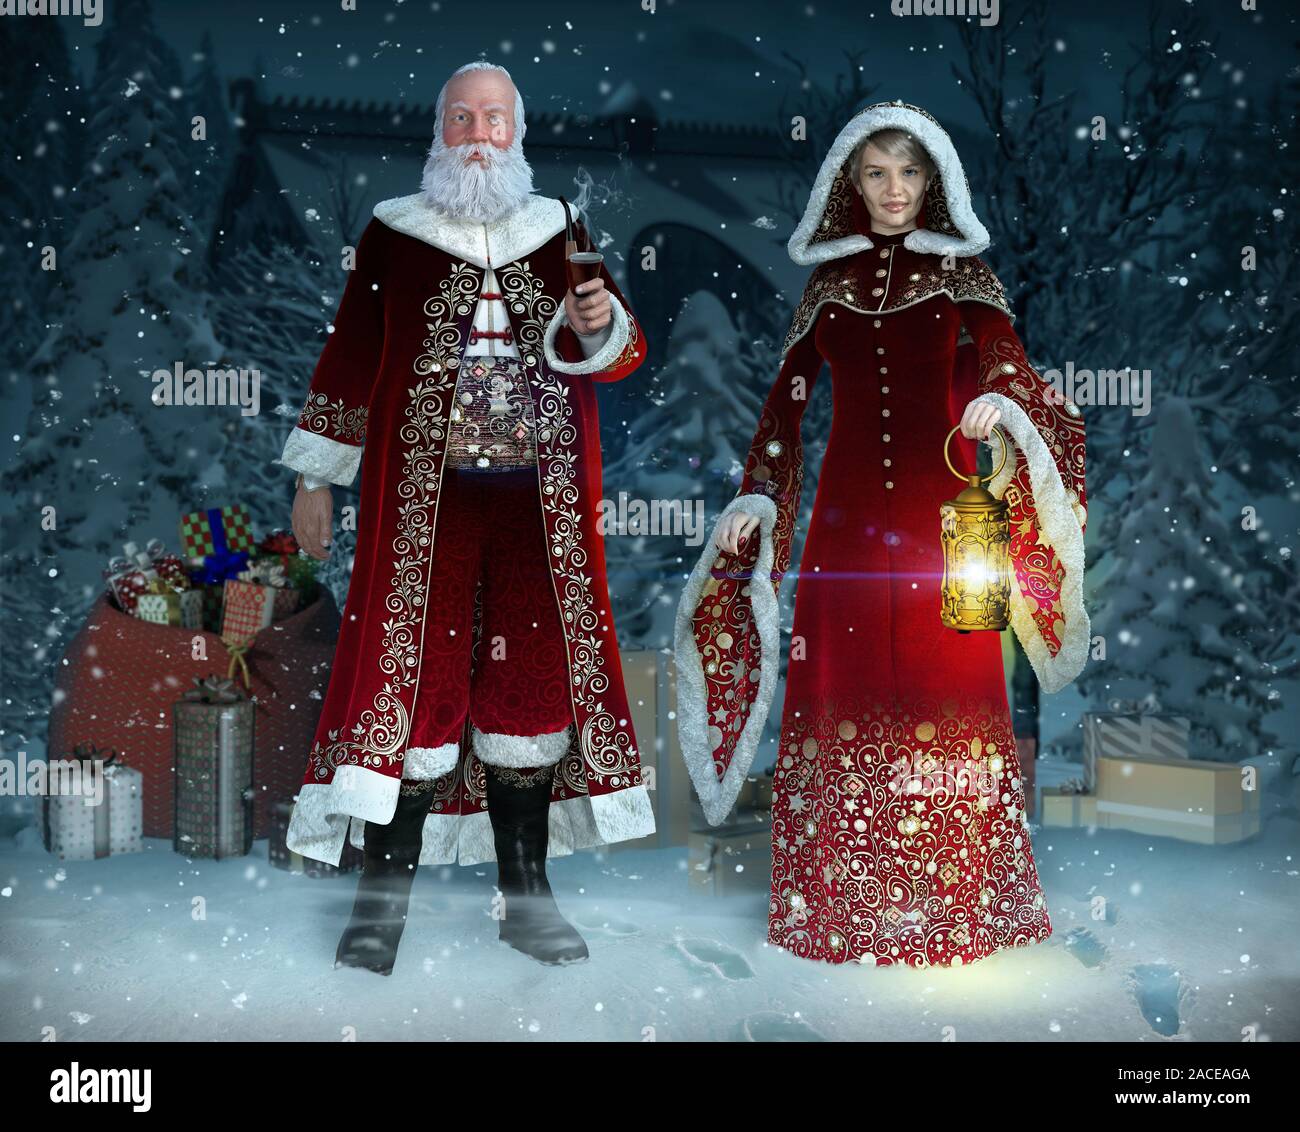 Enchanting Mr and Mrs Santa Claus at Christmas Night in their traditional costumes preparing gifts for the children of the world, 3d render Stock Photo